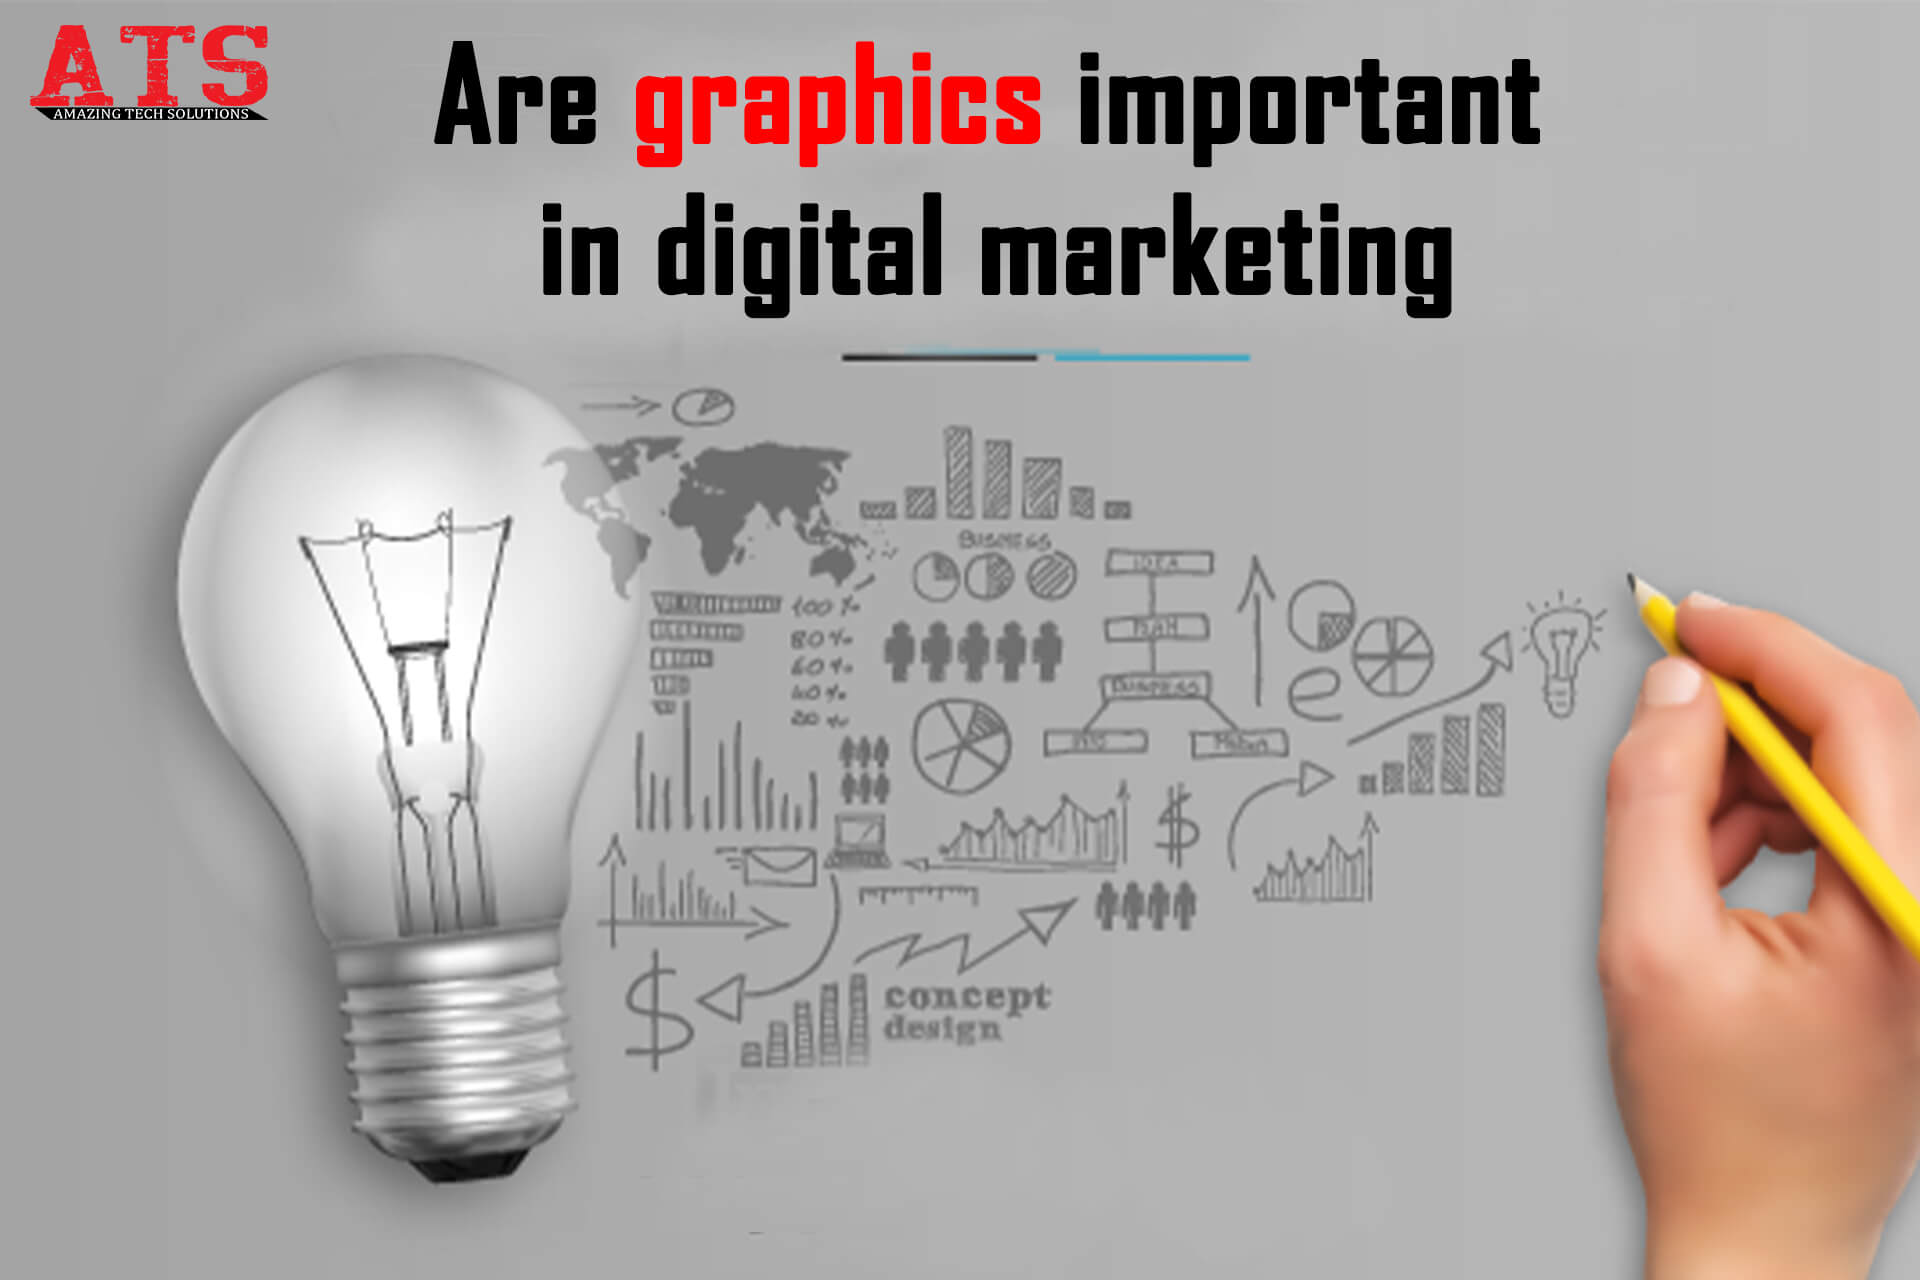 Is graphic designing is important in digital marketing